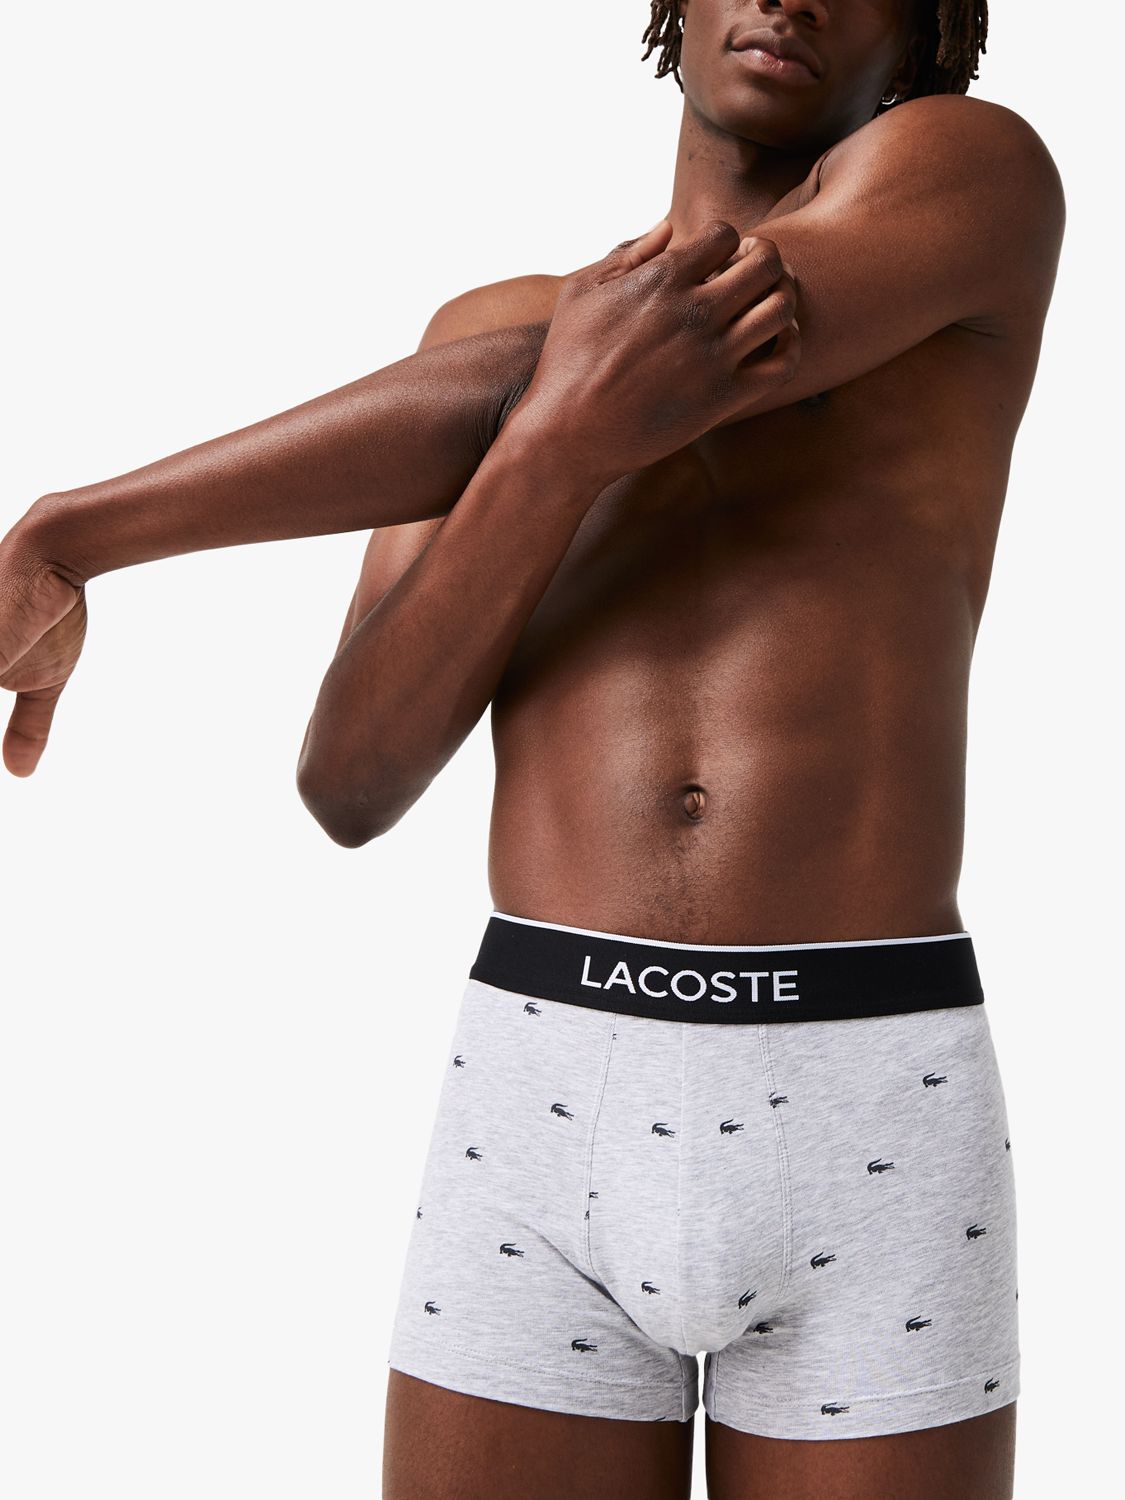 Lacoste Signature Trunks, Pack of 3 at John Lewis & Partners